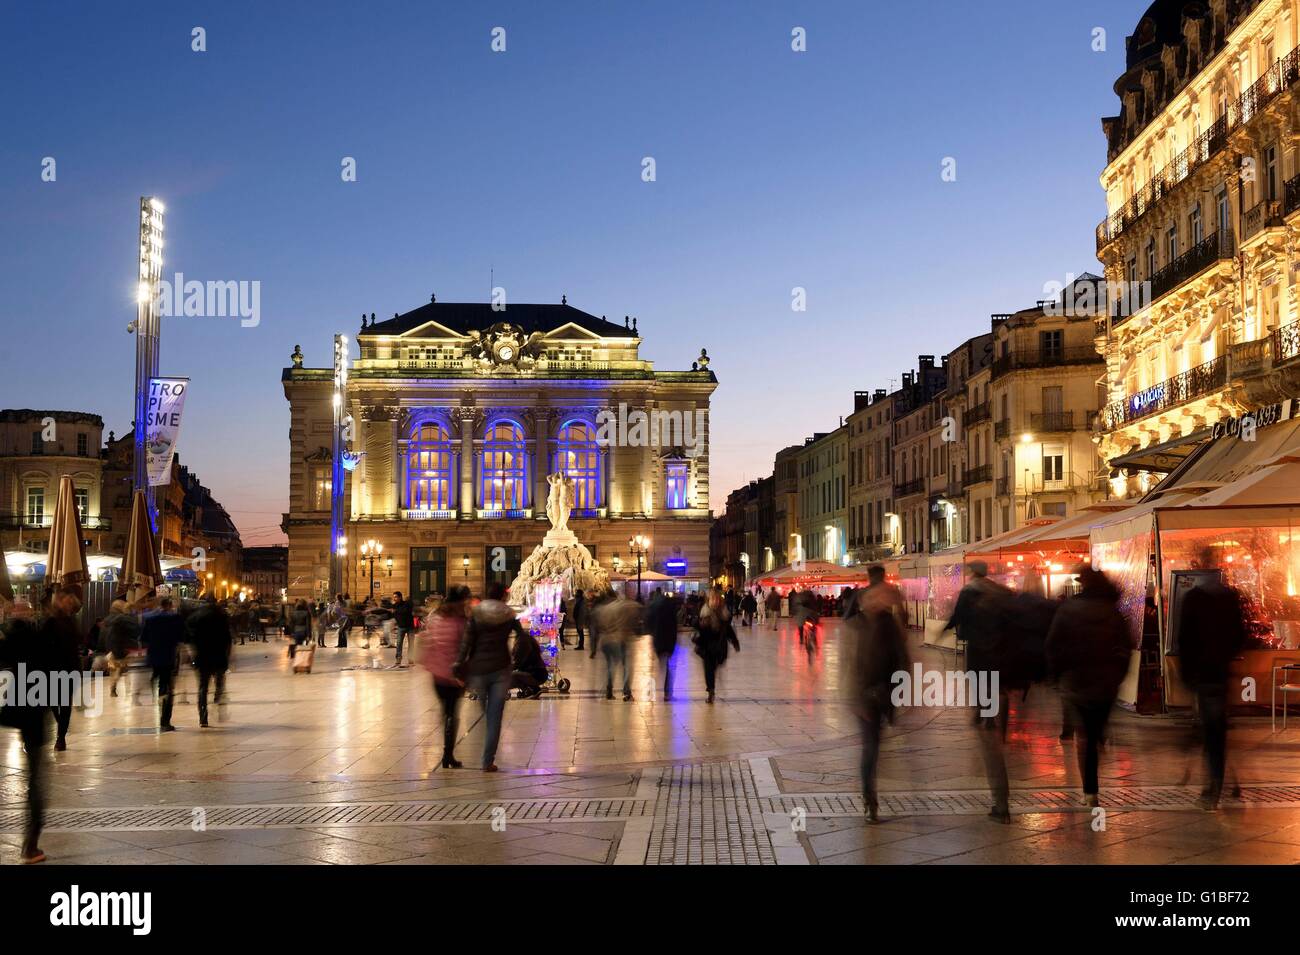 France, Herault, Montpellier, historical center, the Ecusson, Place de la Comedie (Comedy Square) with the Opera Stock Photo